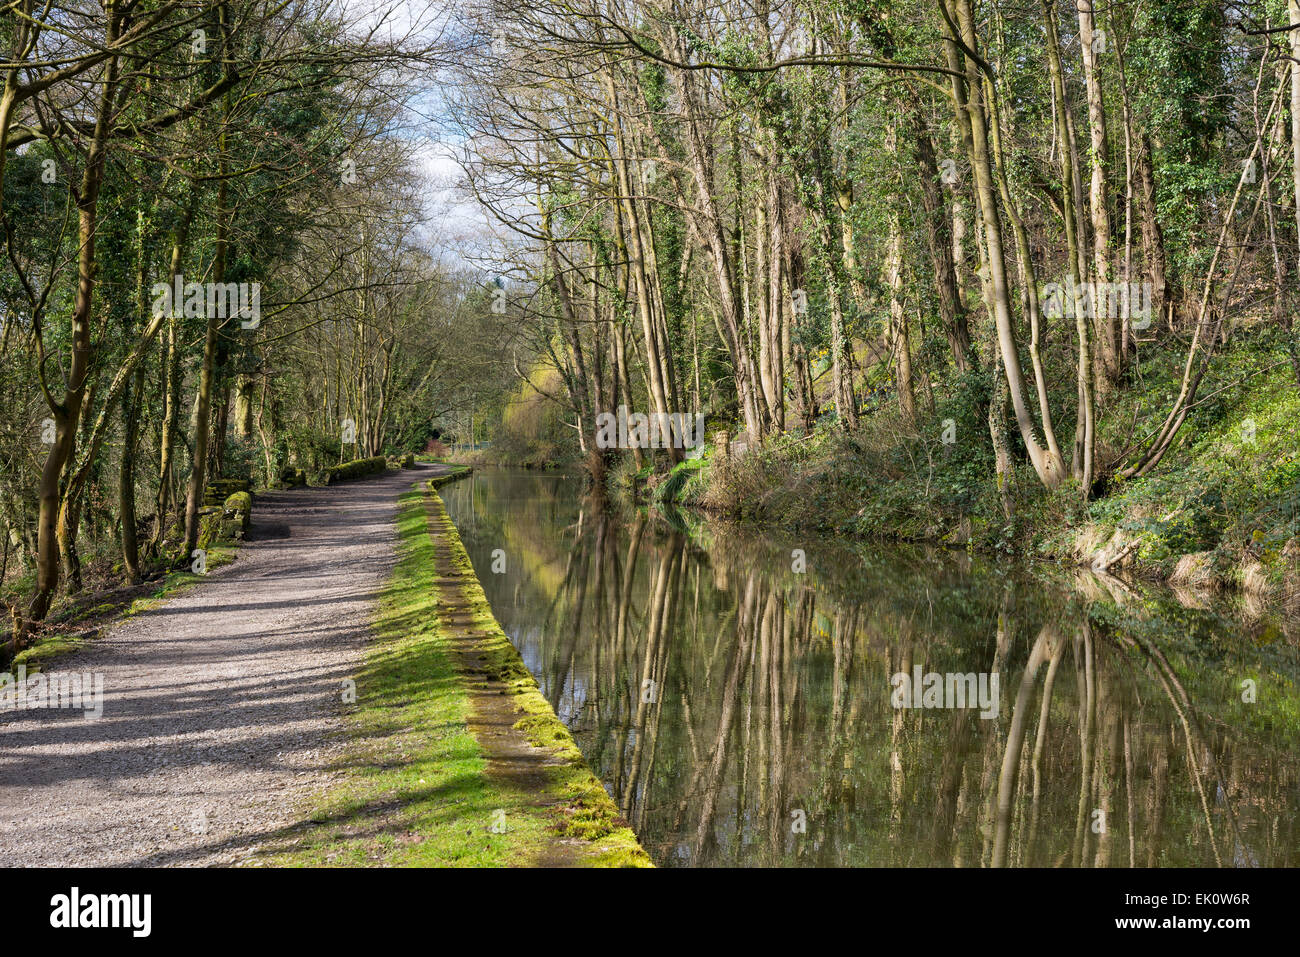 The Peak Forest canal near Romiley, Stockport. A sunny spring morning with trees reflected in the still water. Stock Photo